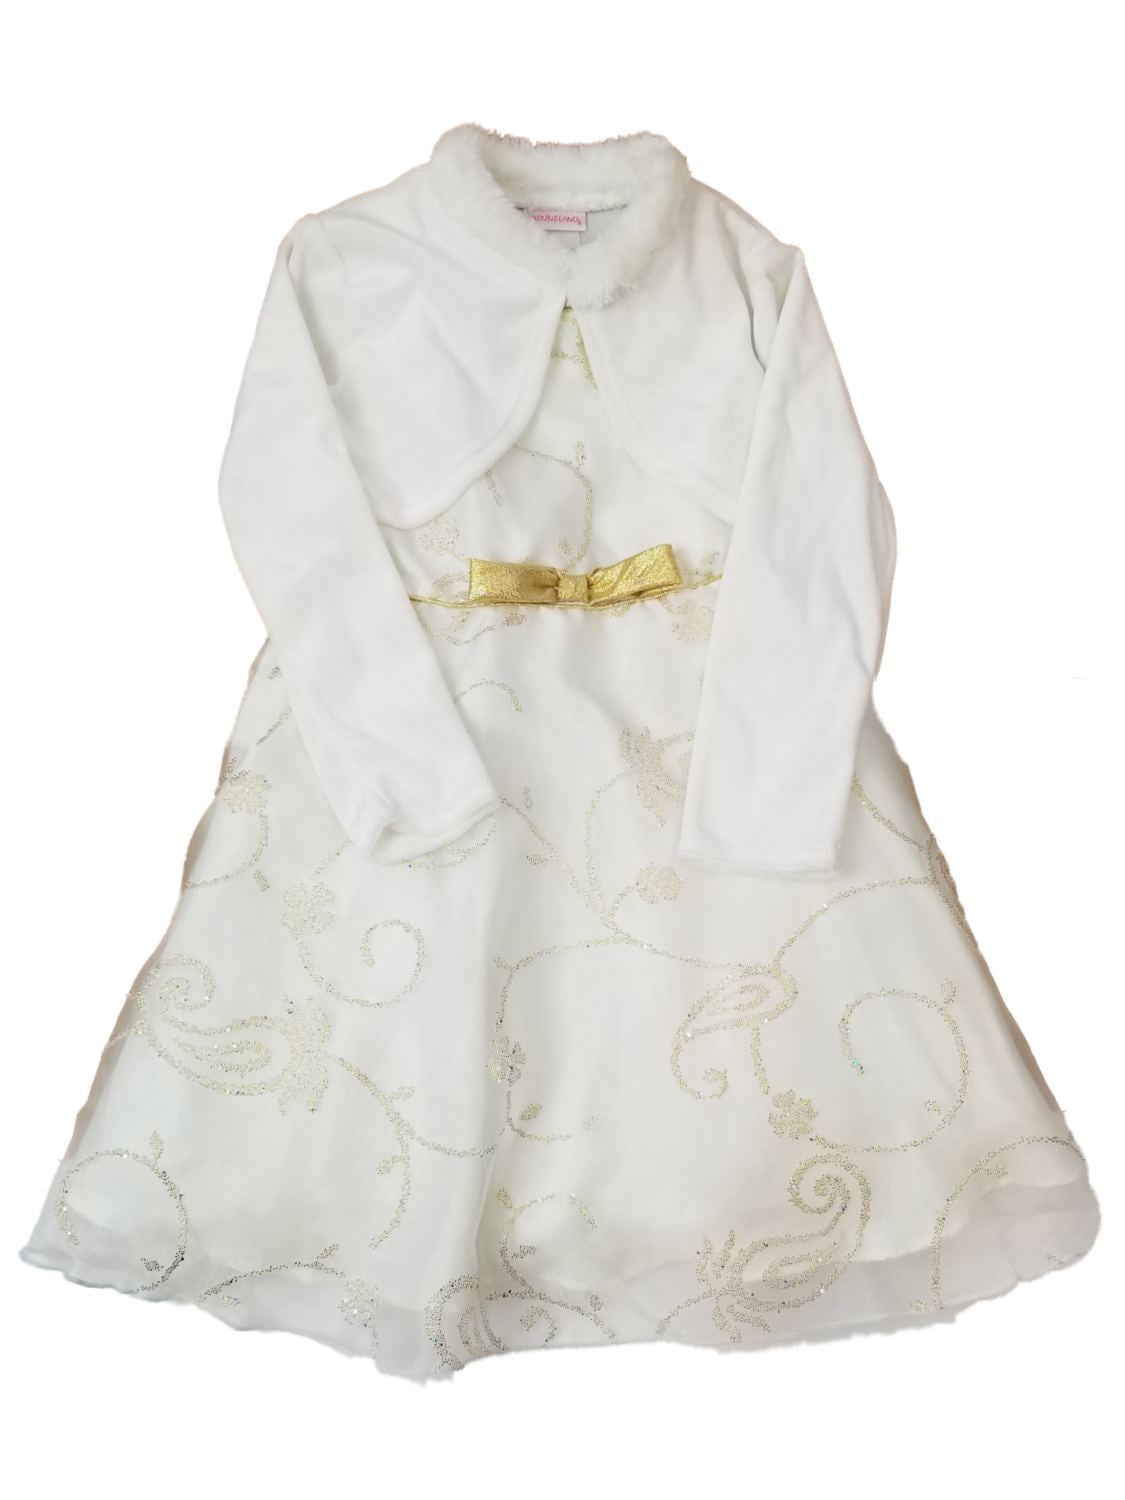 white and gold baby dress